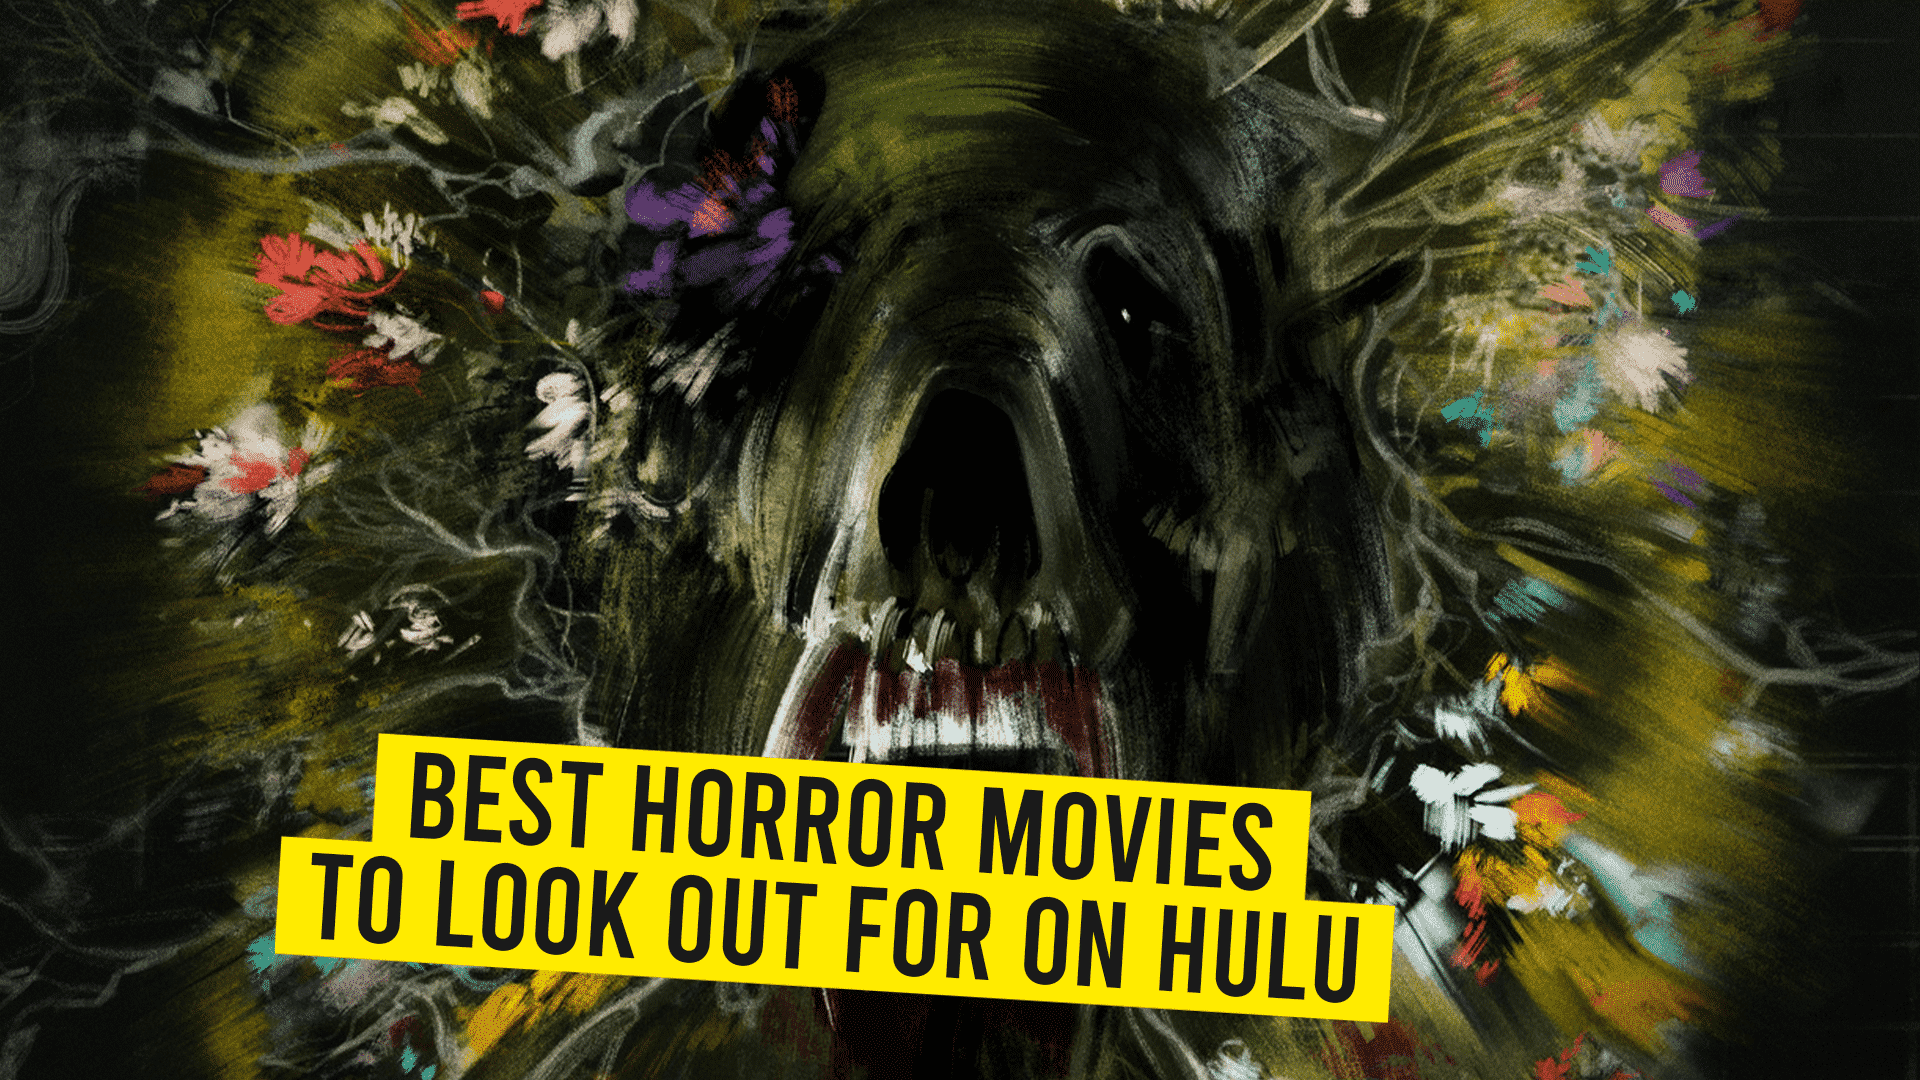 The Best Horror Movies To Look Out For On Hulu